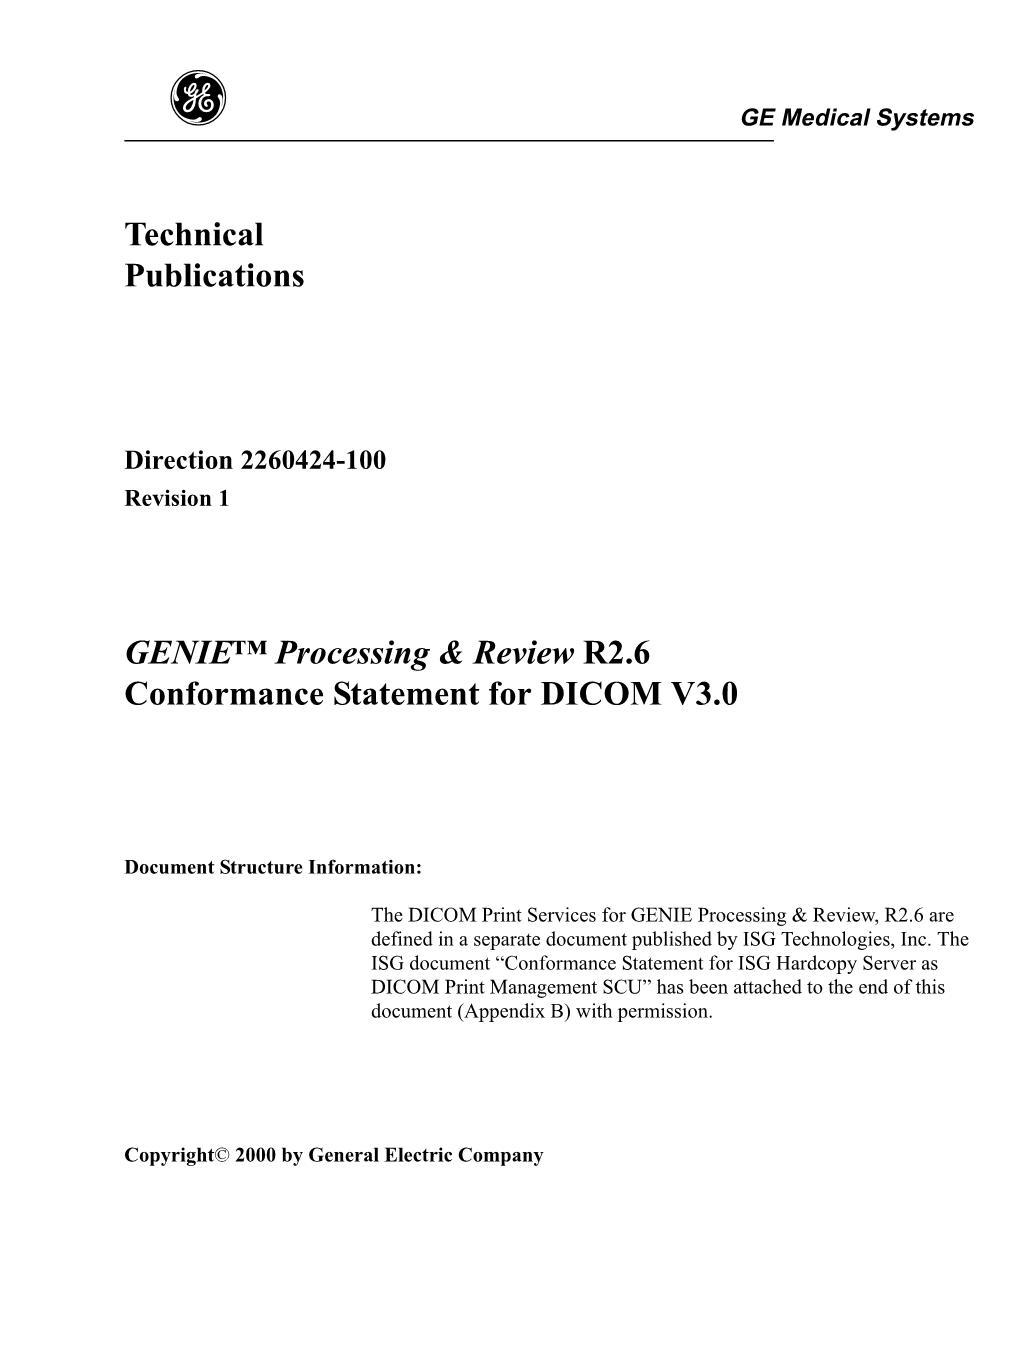 GENIE Processing & Review R2.6